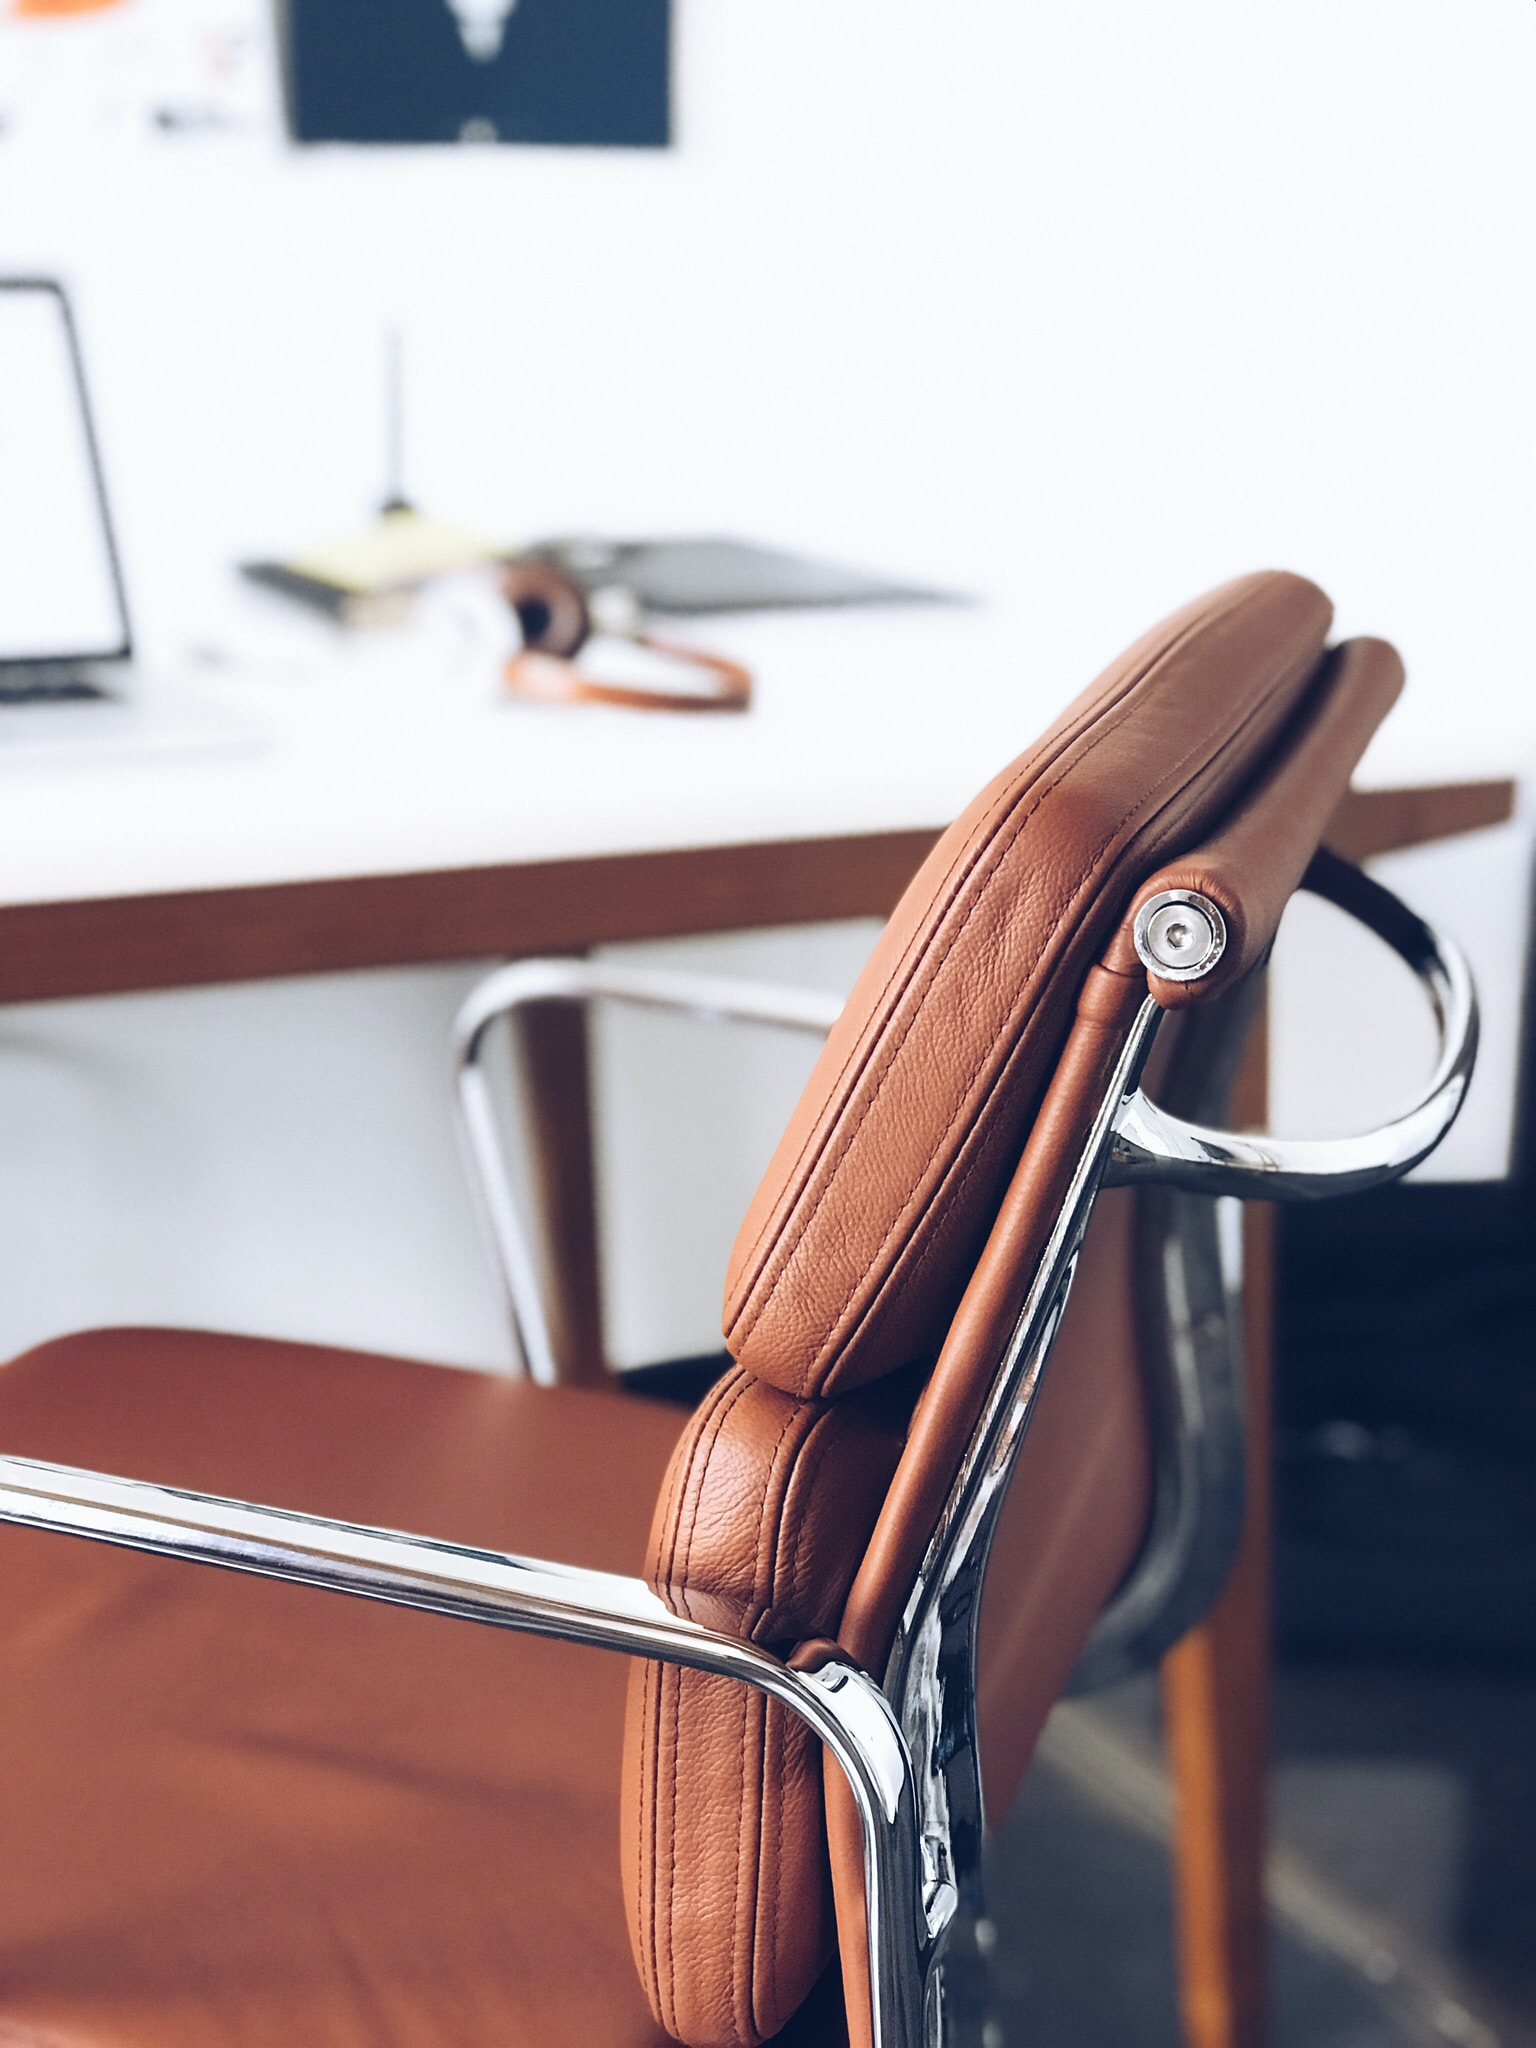 12 Signs You Should Hire Cleaners for Office Chair Cleaning